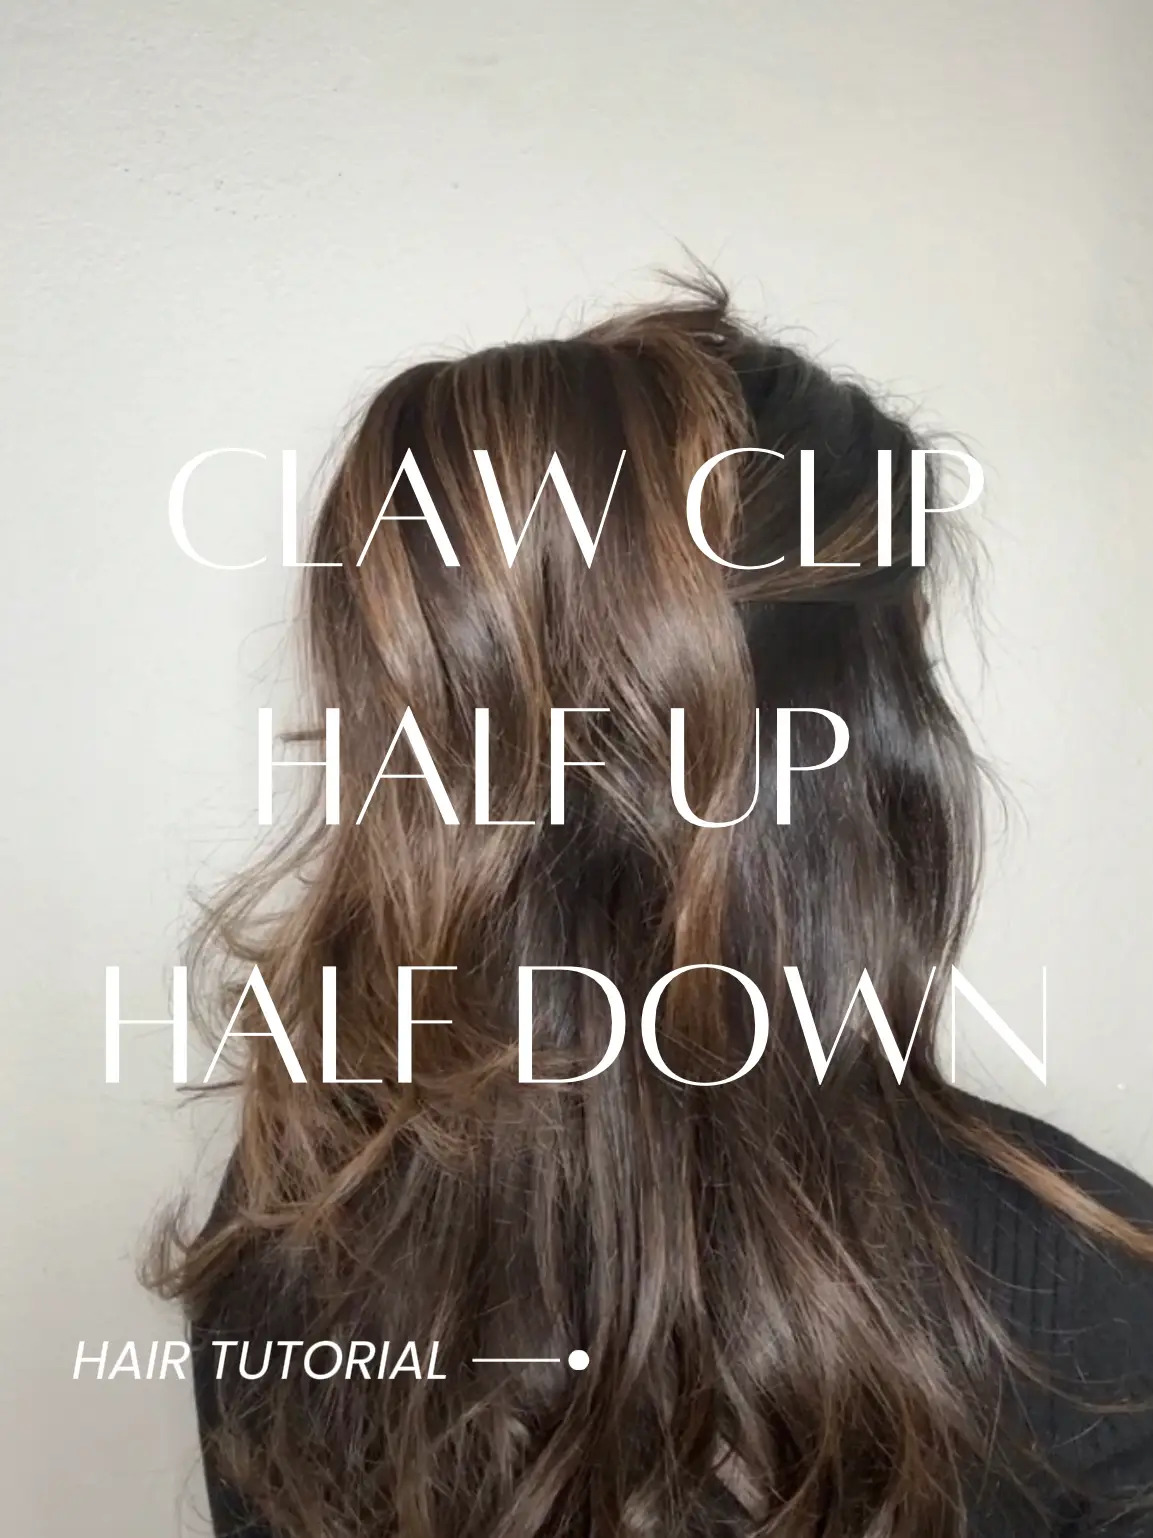 Claw clip half up half down hairstyle, Video published by Jasmine Kapoor